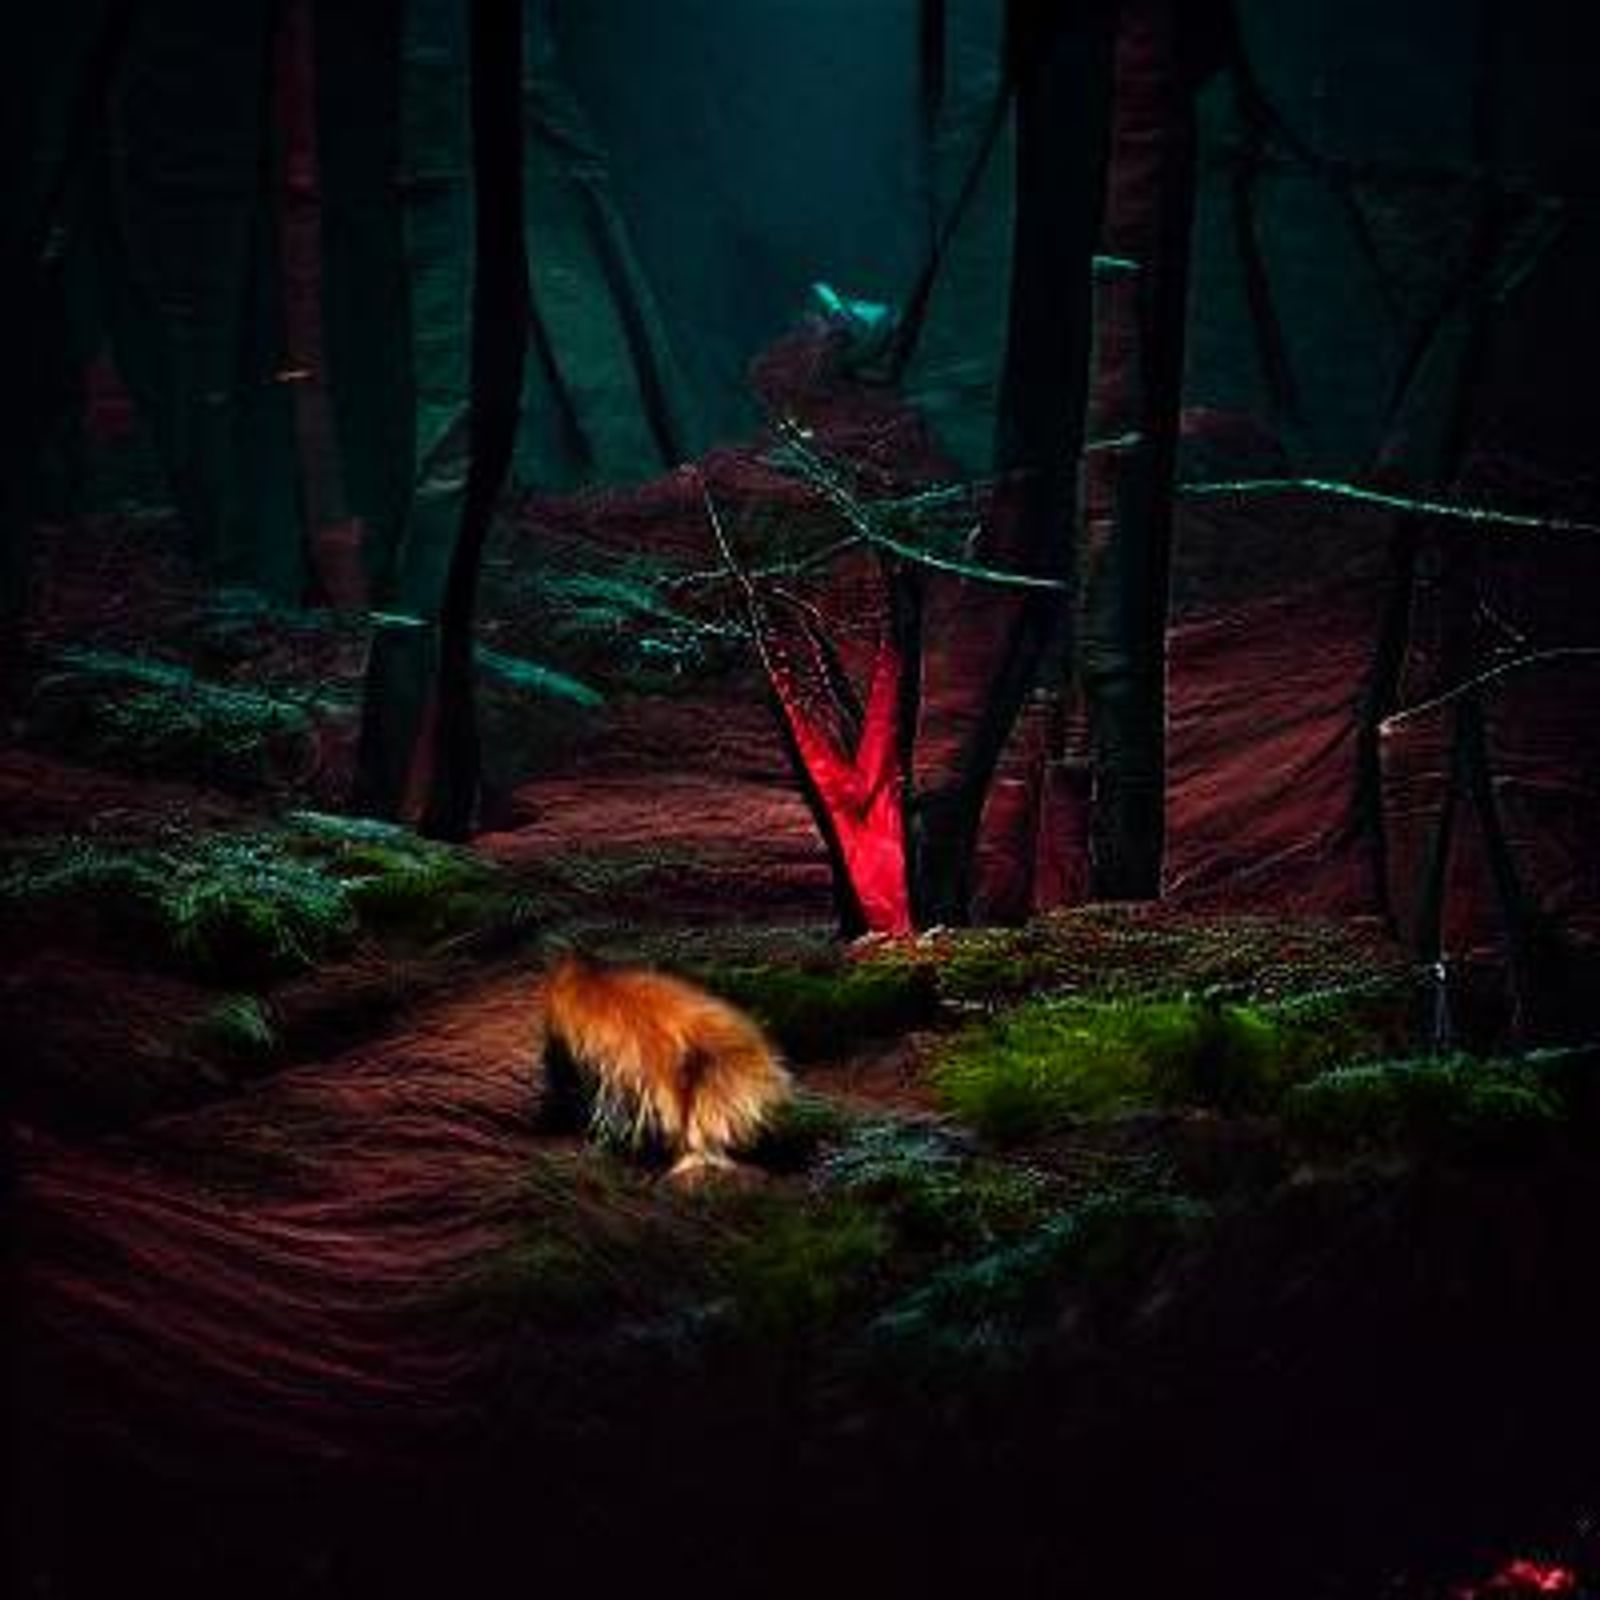 red lit forest